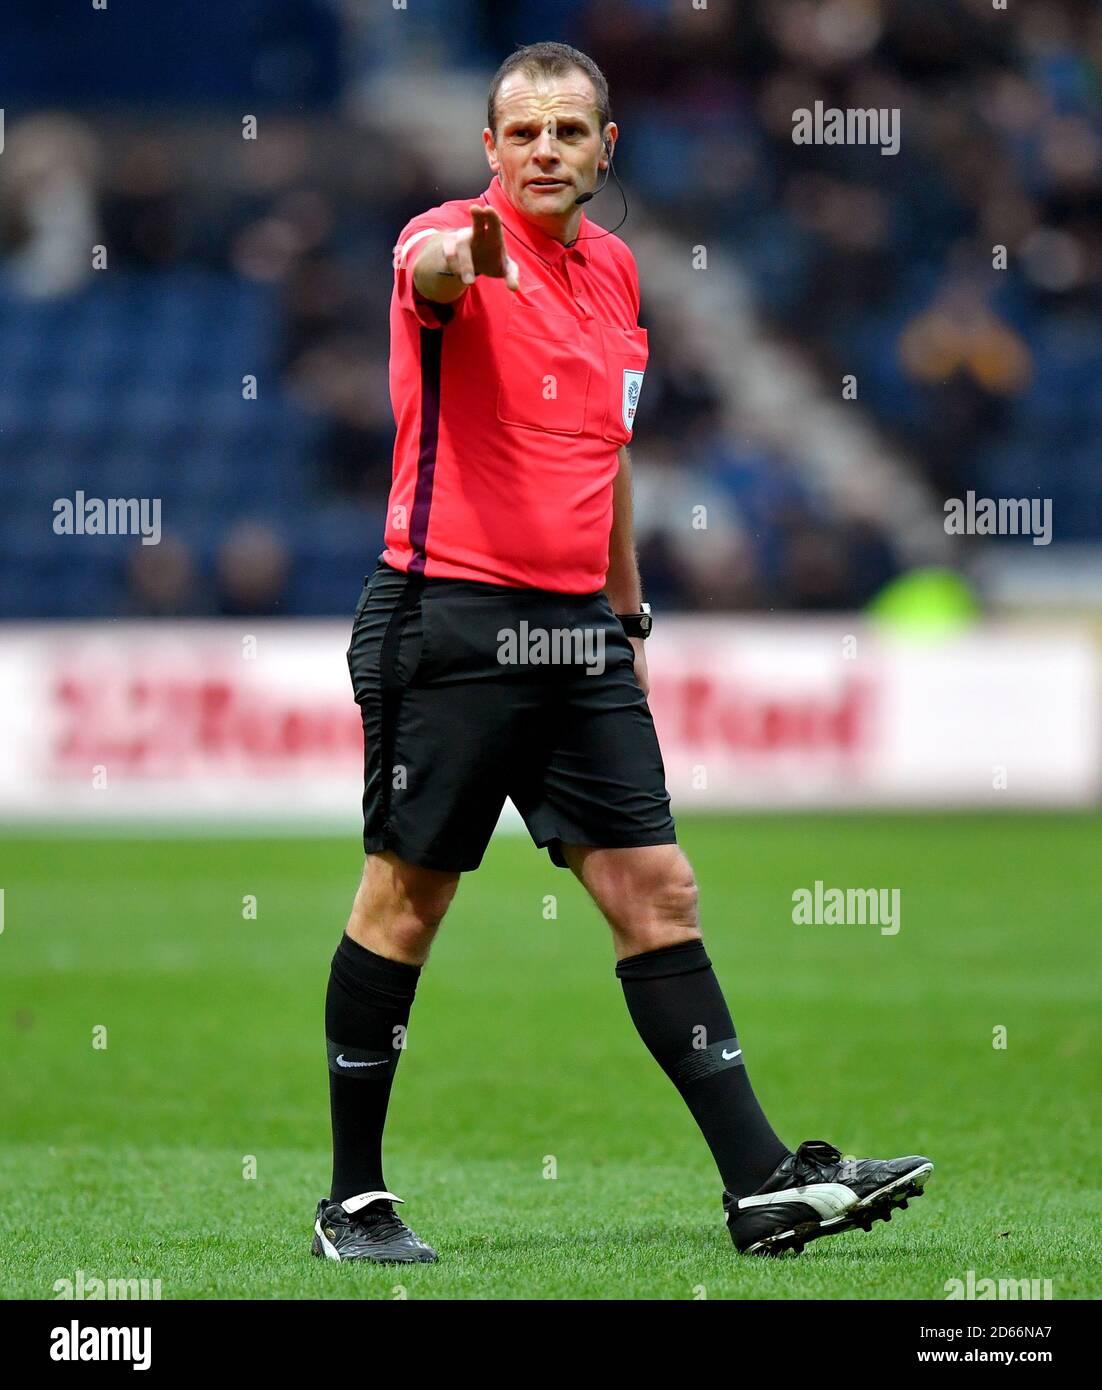 Referee Geoff Eltringham gestures on the pitch Stock Photo - Alamy